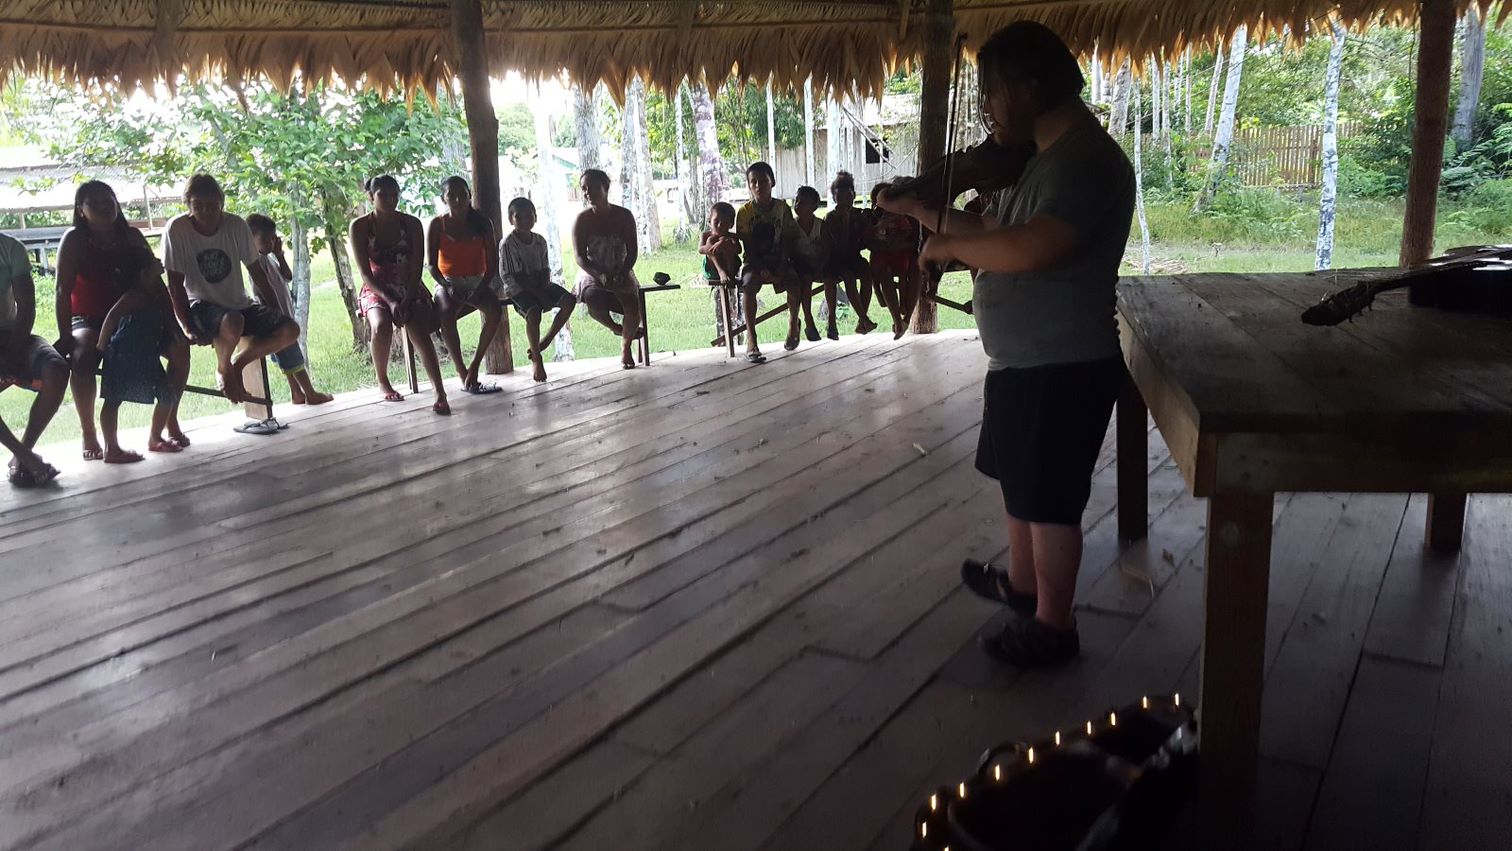 Fionn playing traditional Irish music for the local community in the Amazon Rainforest. Fionnathan